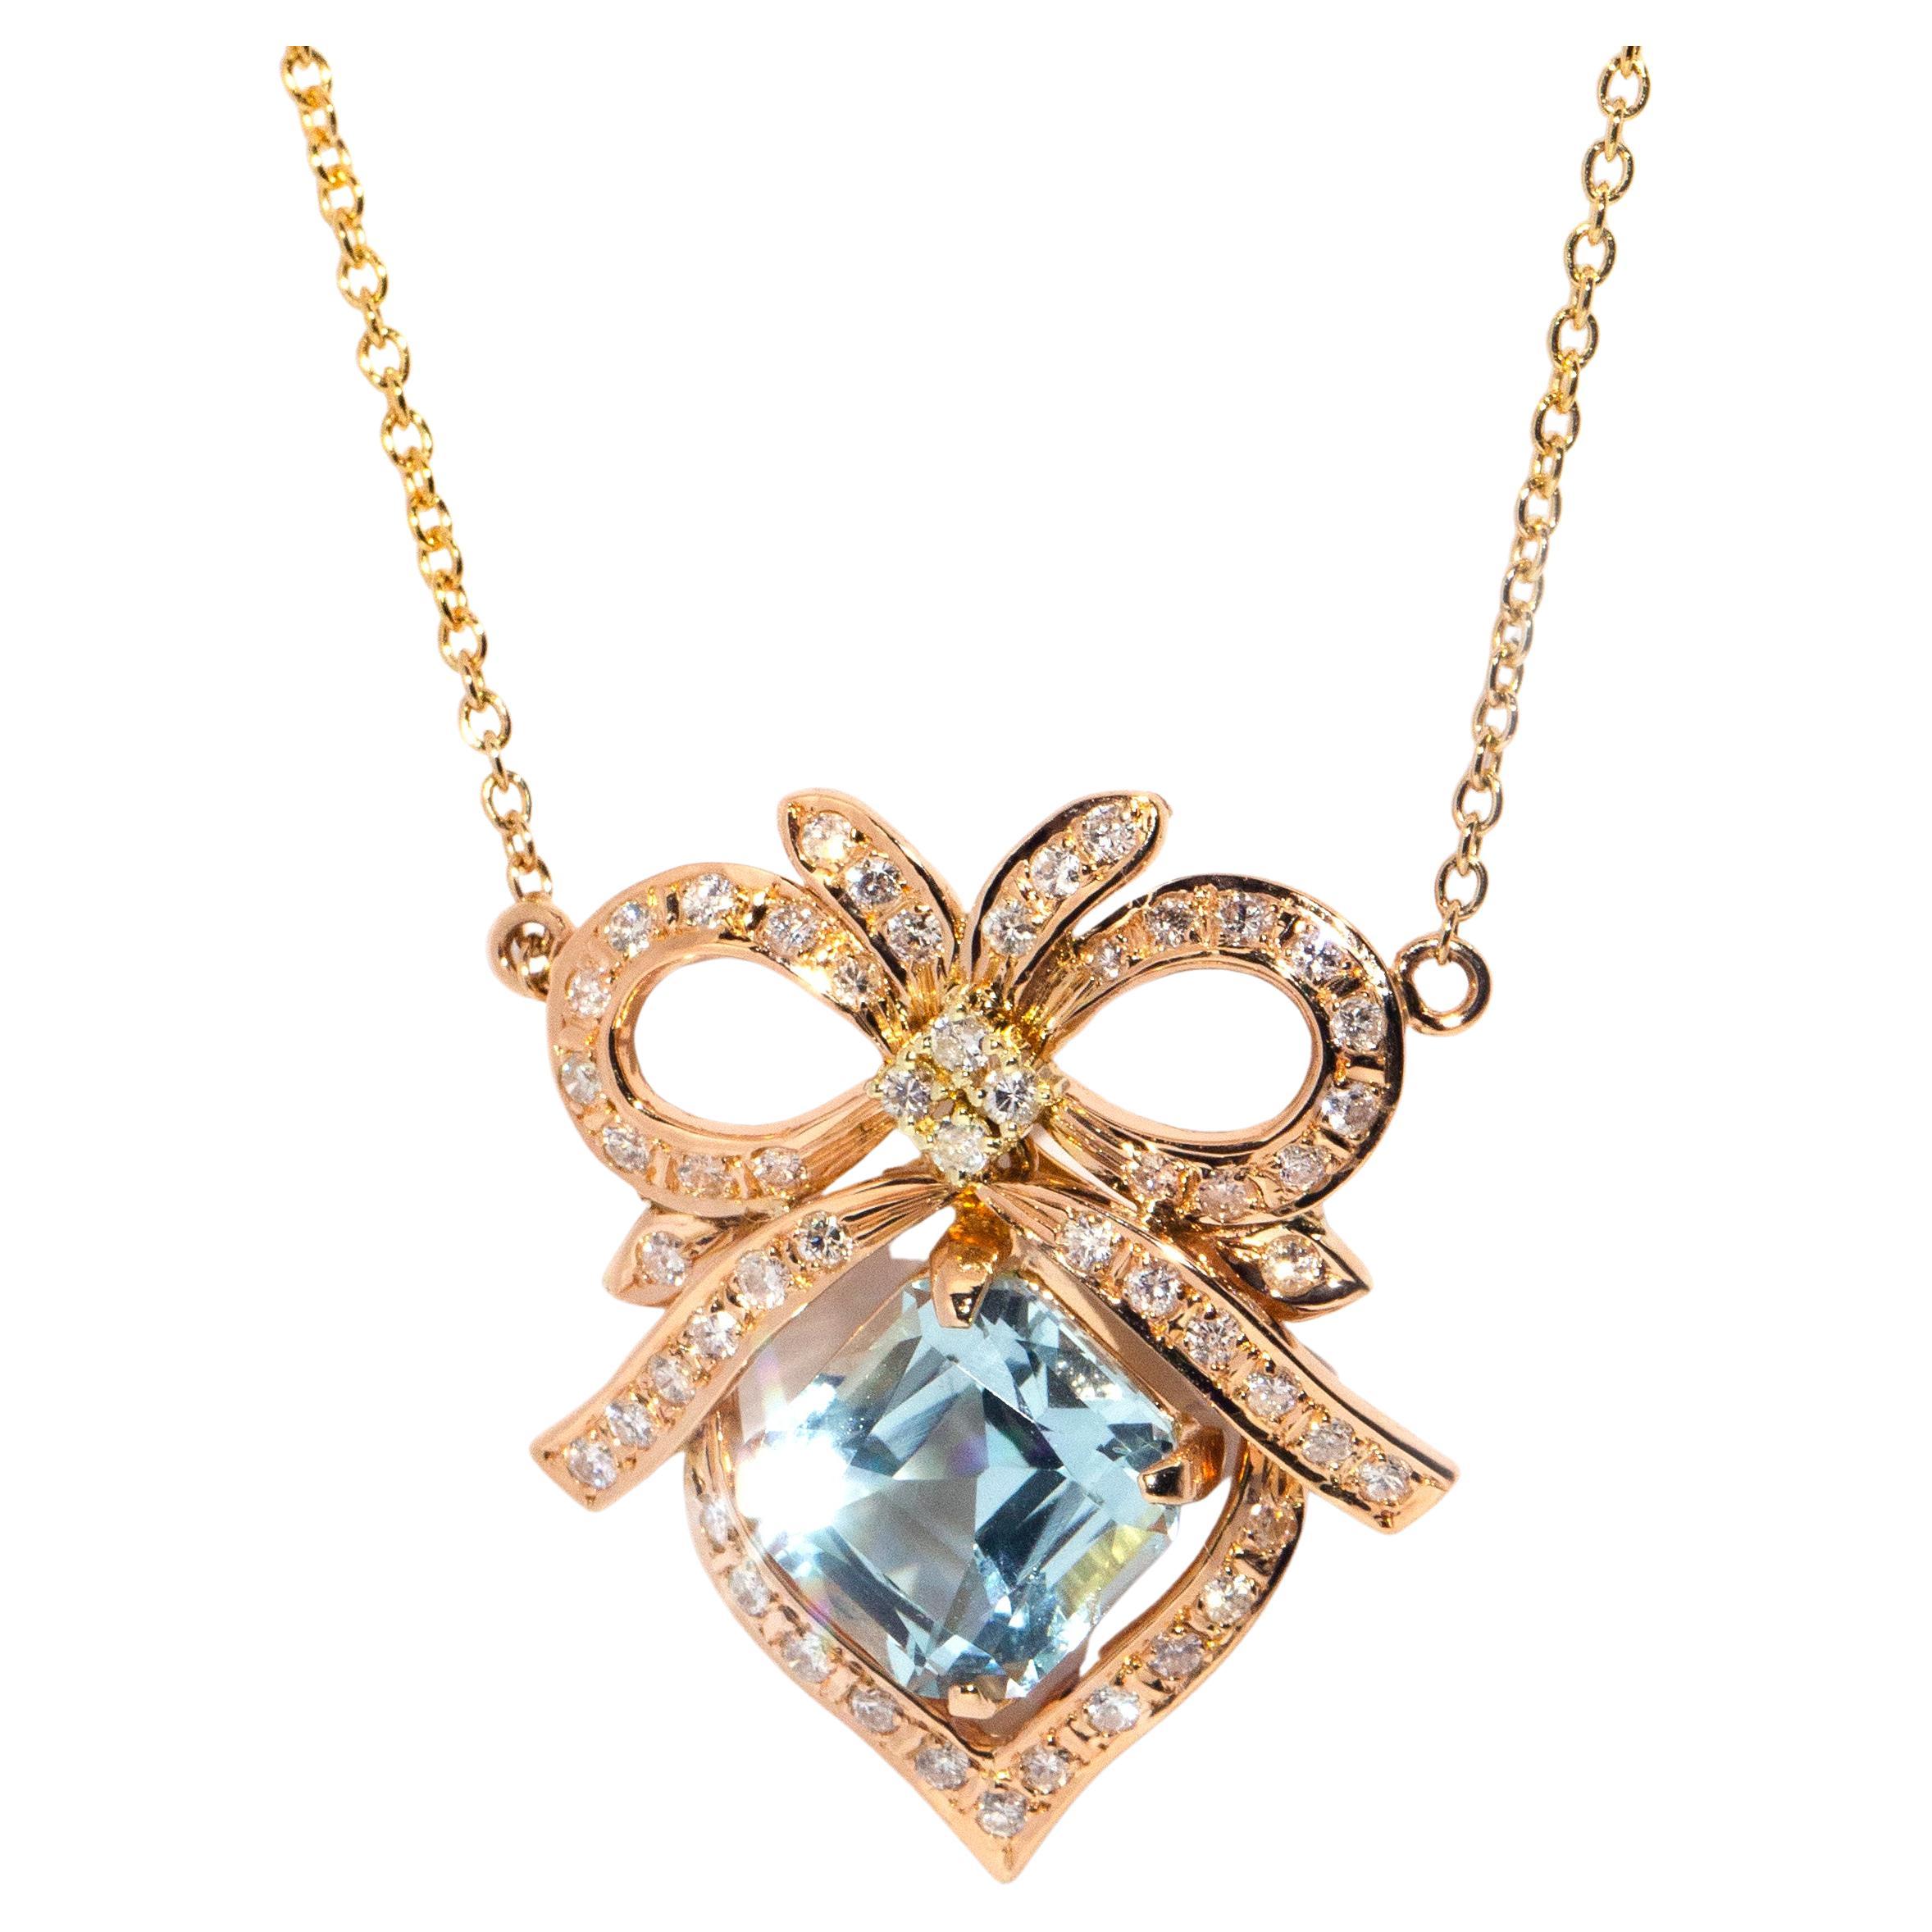 Aquamarine and Diamond Vintage 14 Carat Gold Necklet with 9 Carat Gold Chain